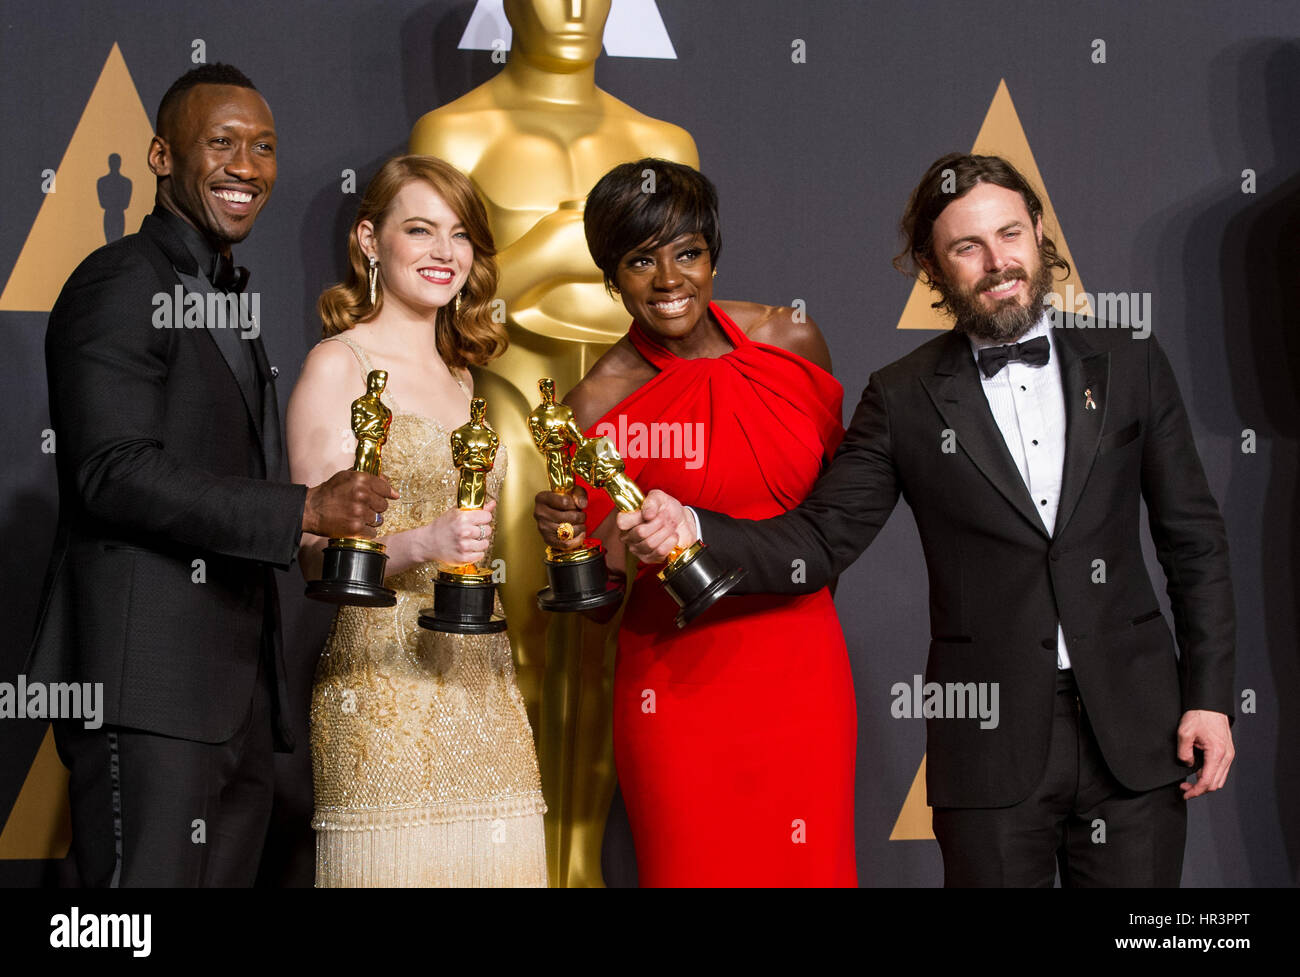 Los Angeles, USA. 26th Feb, 2017. (L-R) Actor Mahershala Ali, winner of Best Supporting Actor for 'Moonlight,' Emma Stone, winner of Best Actress for 'La La Land,' Viola Davis, winner of Best Supporting Actress for 'Fences,' and Casey Affleck, winner of Best Actor for 'Manchester by the Sea' pose for group photos at press room of the 89th Academy Awards at the Dolby Theater in Los Angeles, the United States, on Feb. 26, 2017. Credit: Yang Lei/Xinhua/Alamy Live News Stock Photo